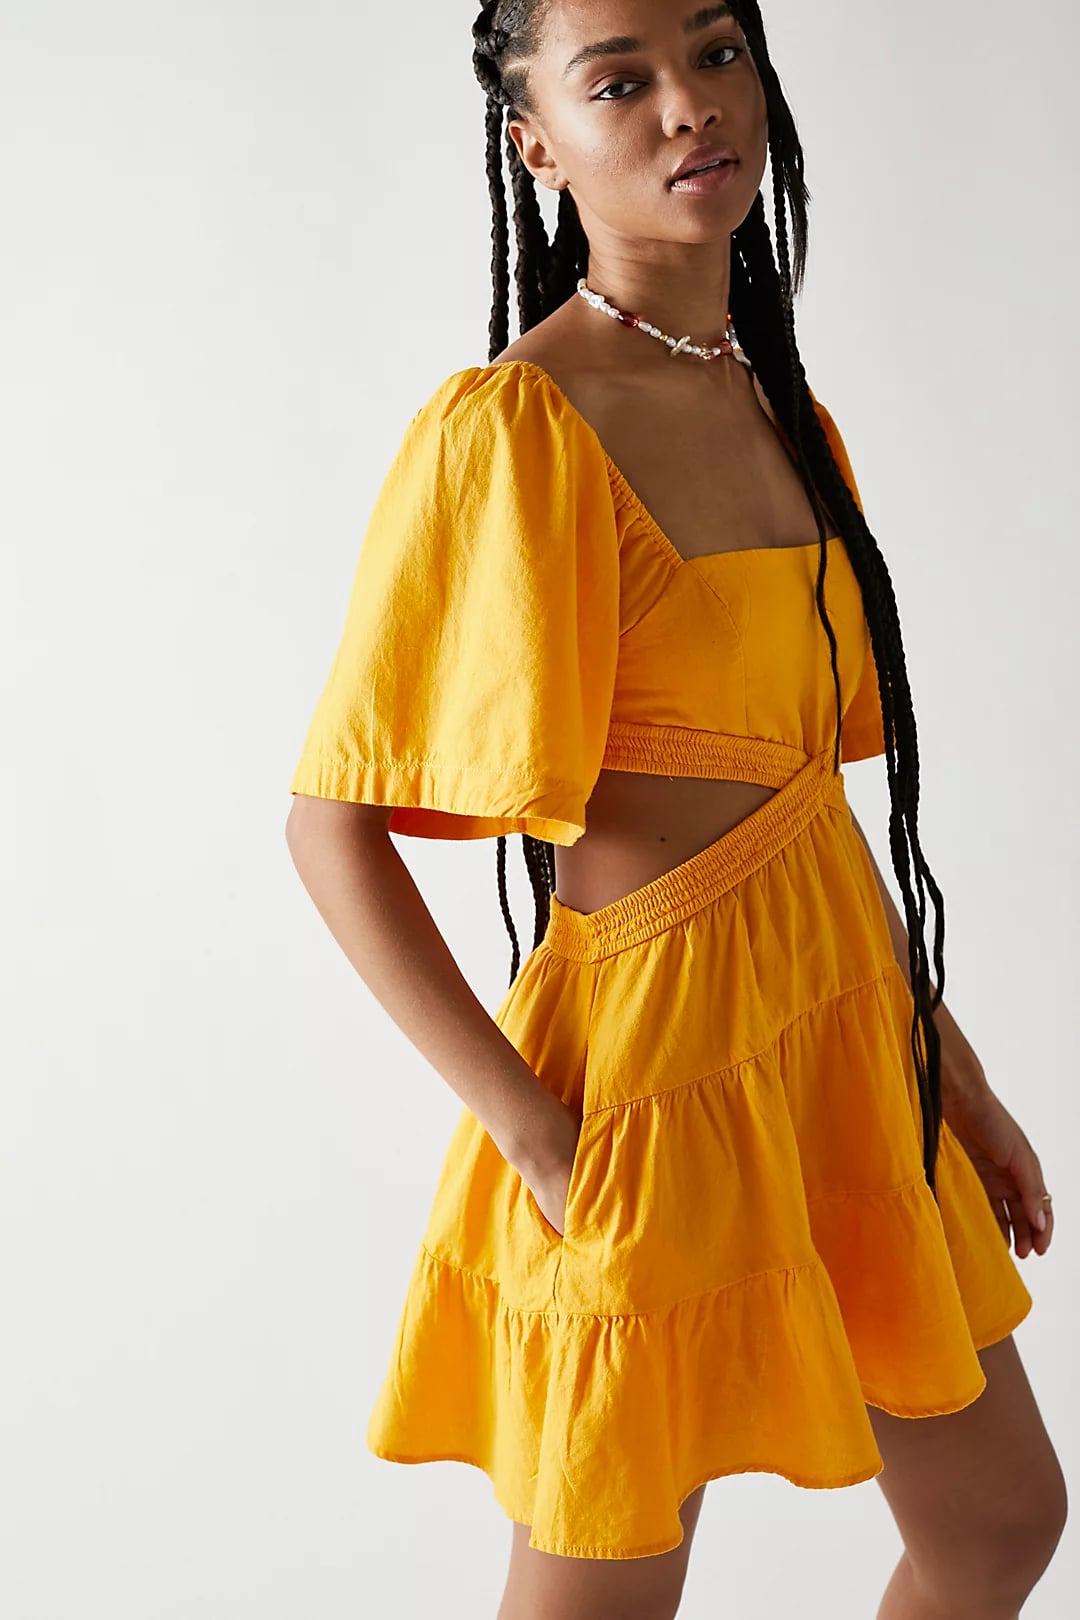 Light and cool: the best beach dresses and accessories for summer | Fashion  | The Guardian